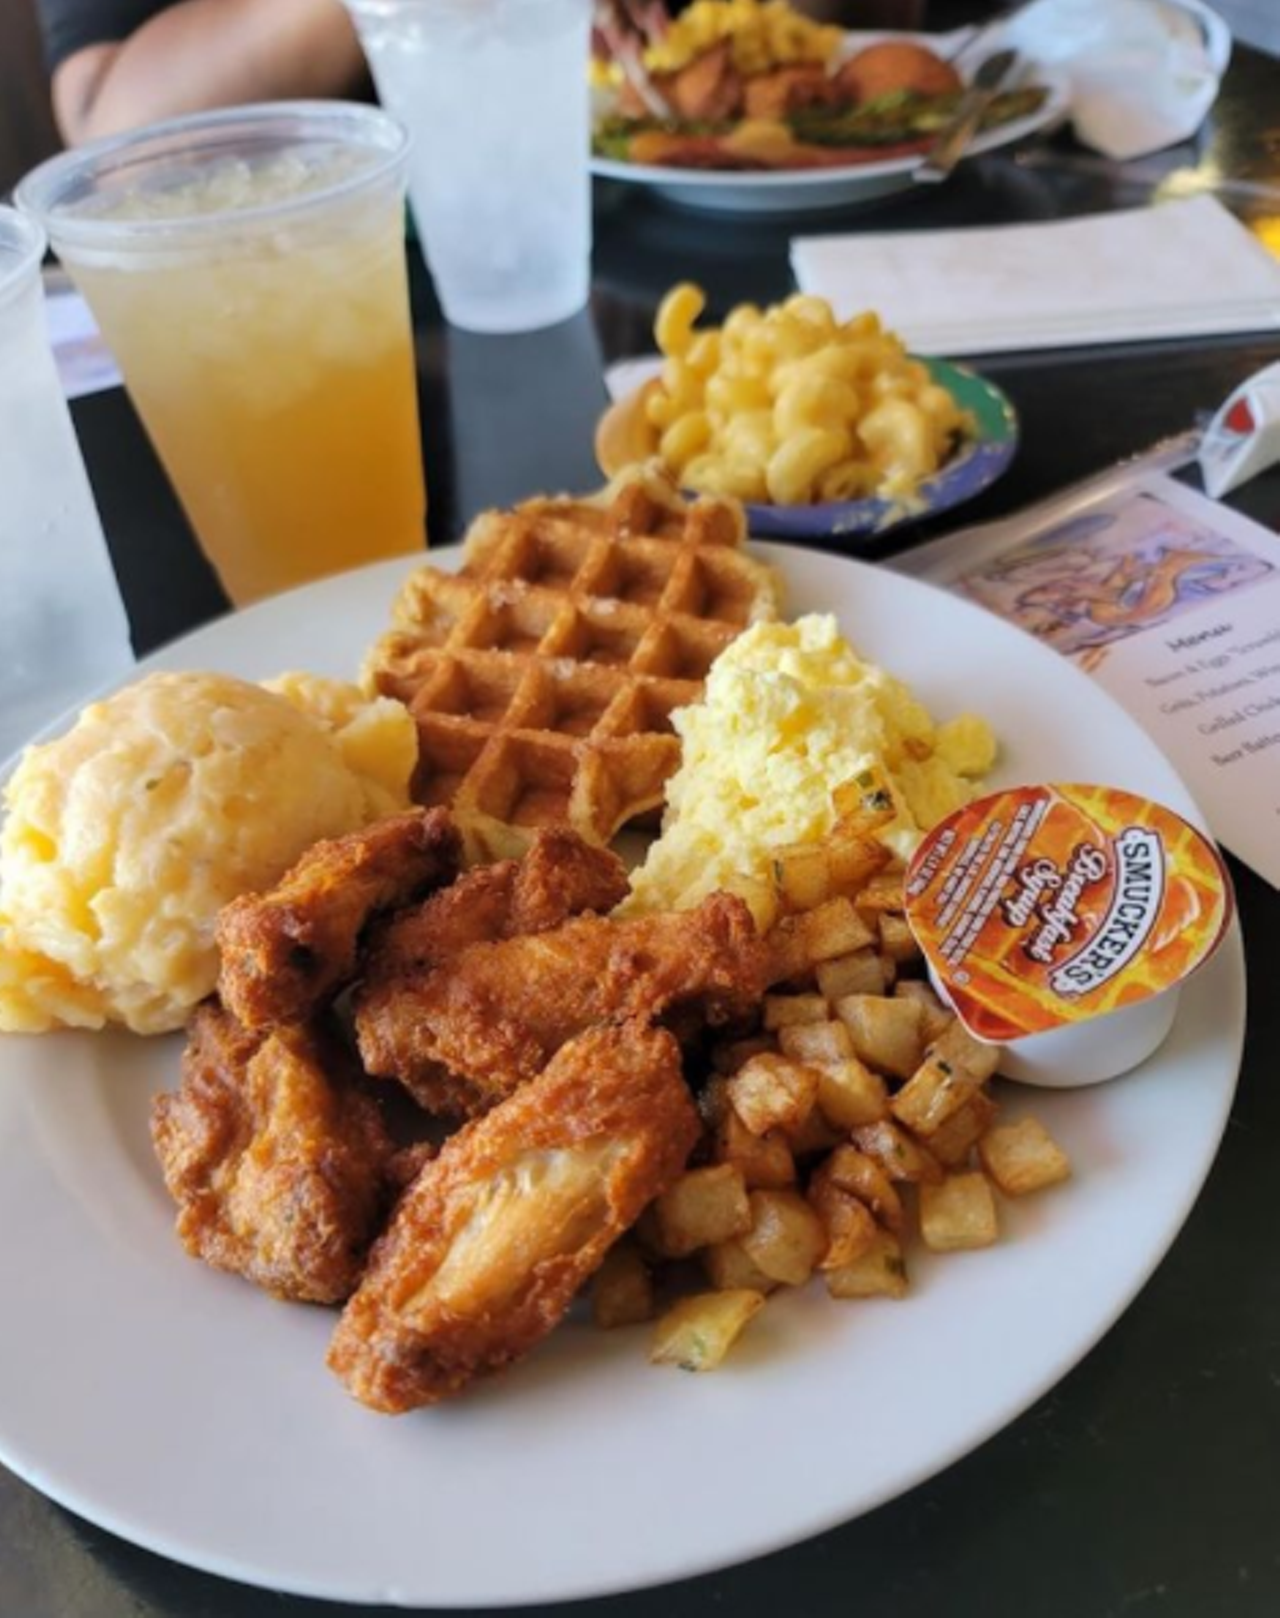 Tony G's Soul Food
915 S Hackberry, (210) 451-1234, tonygssoulfood.com
It’s hard to find a Sunday brunch that beats authentic Southern comfort food accompanied by live jazz music. Tony G’s is a crowd favorite for a reason, after all.
Photo via Instagram /  tonygssoulfood